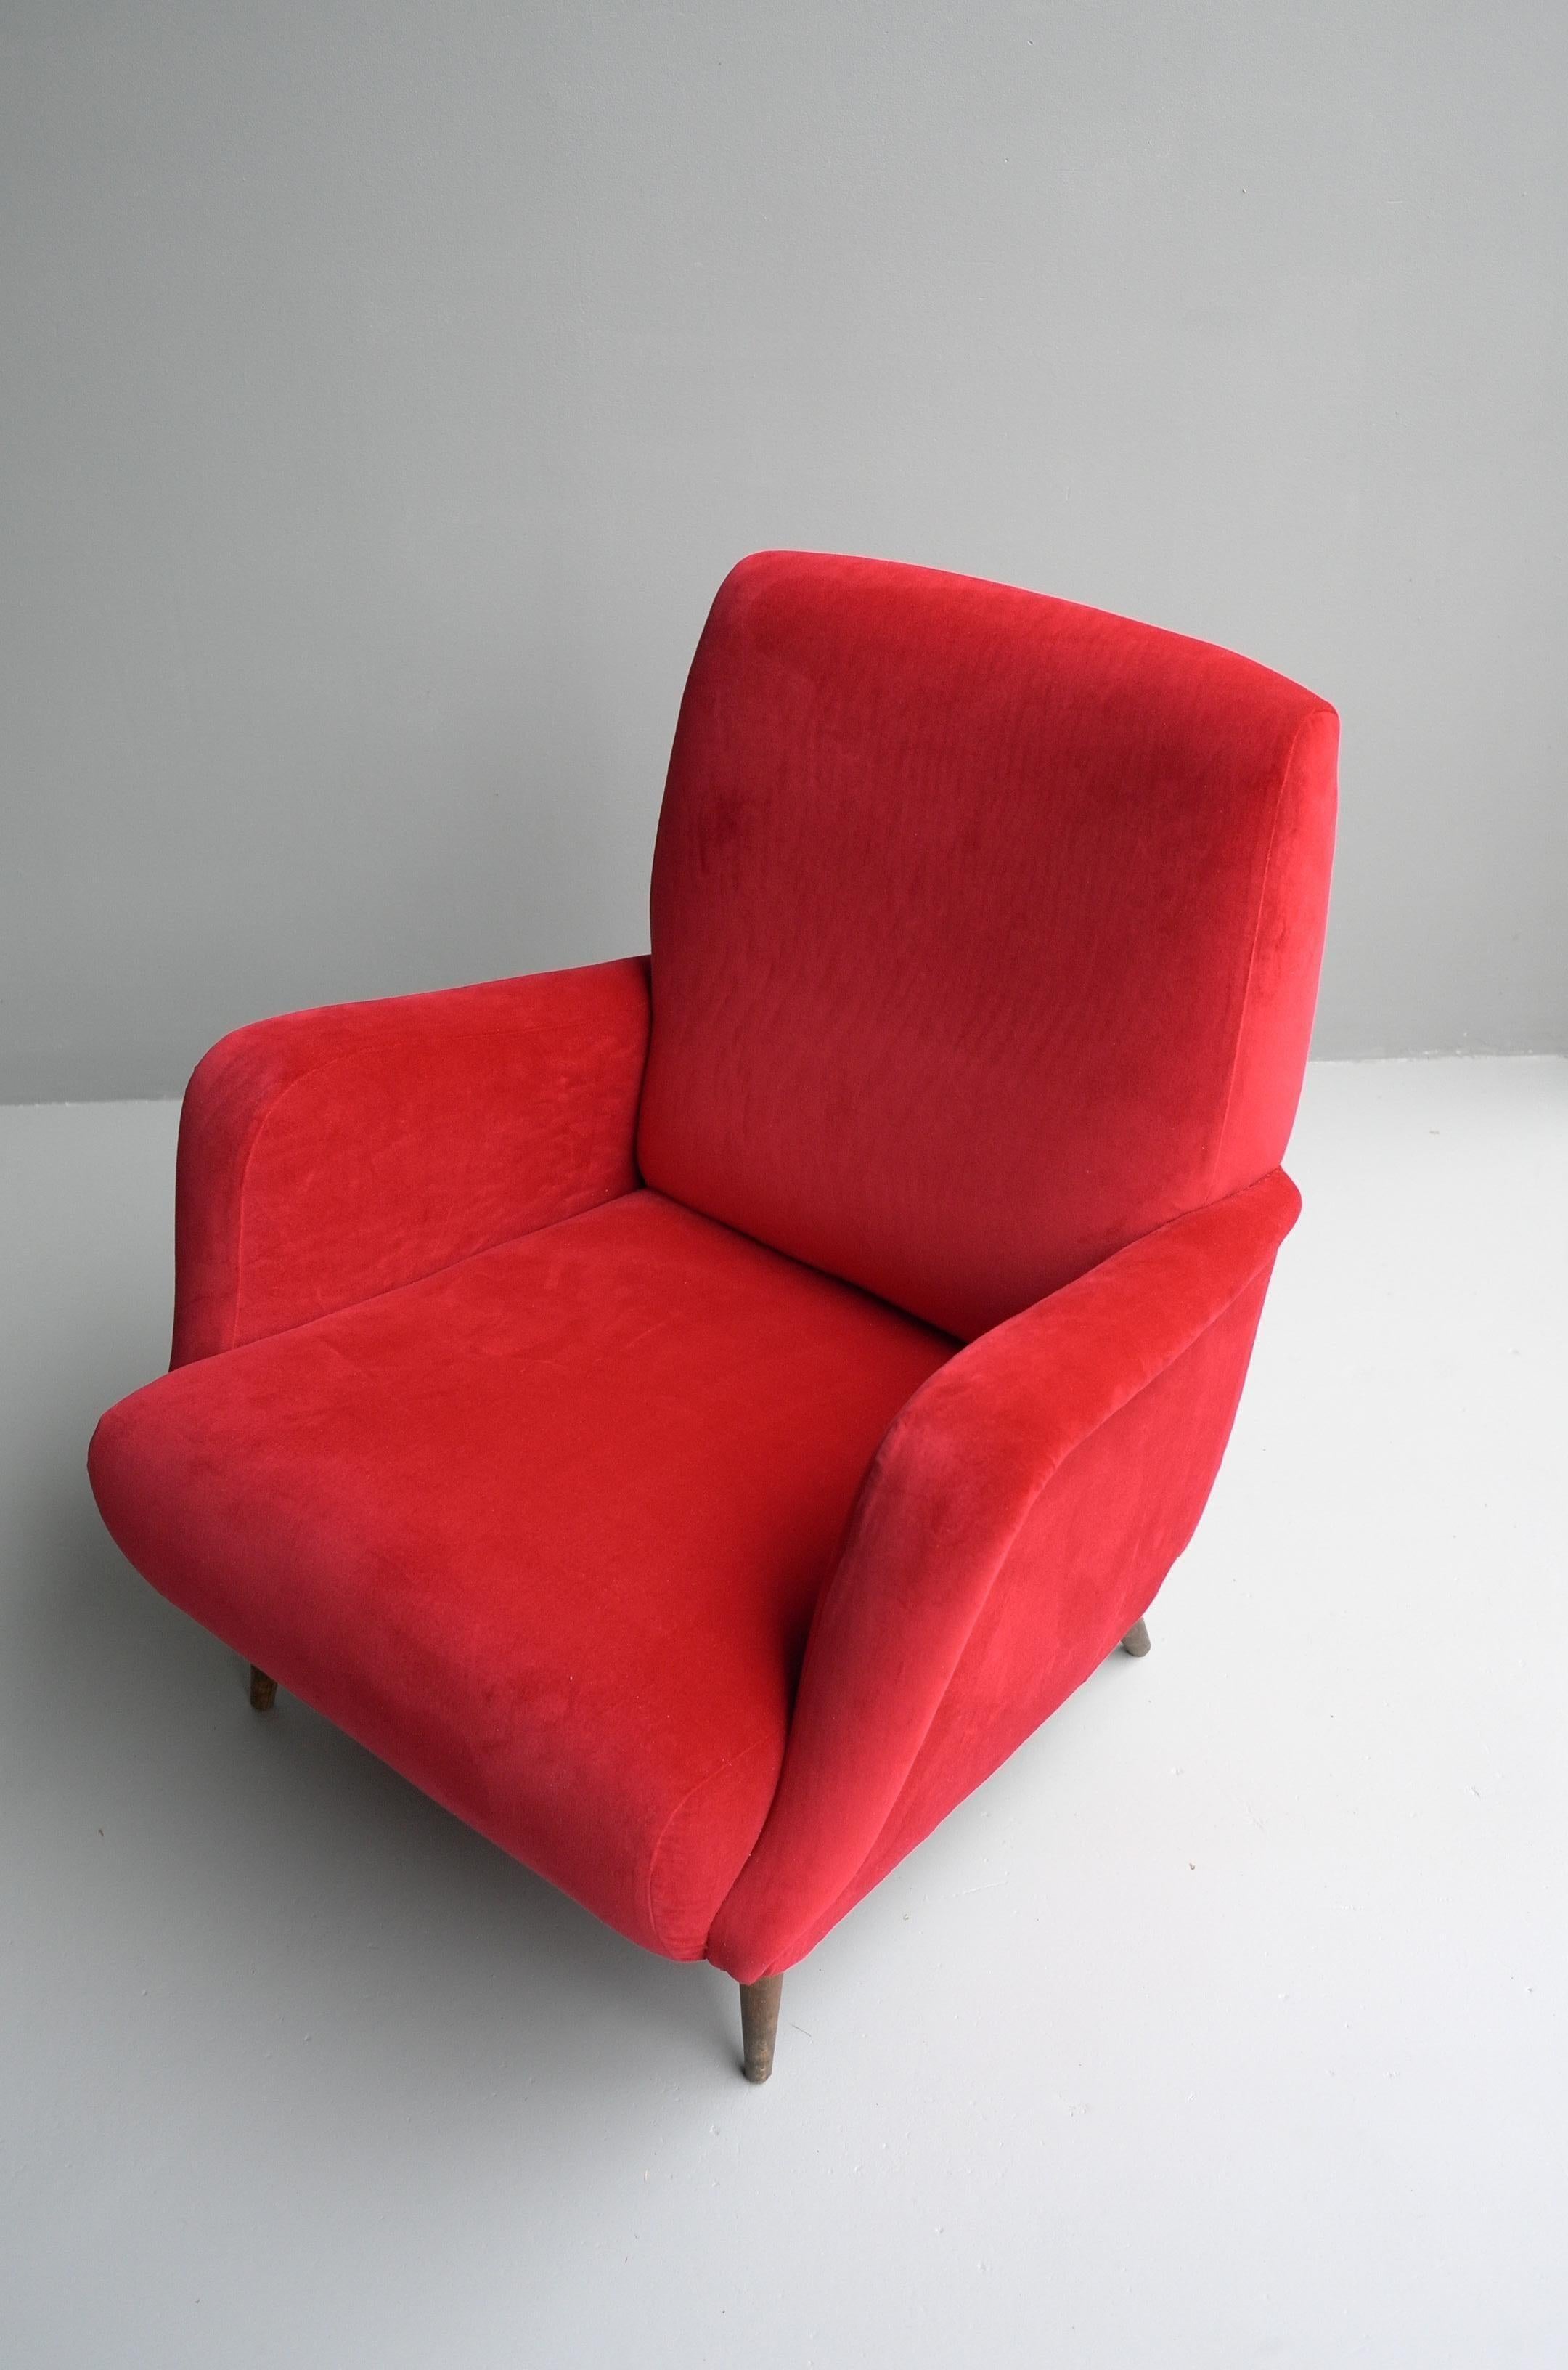 Carlo de Carli Red velvet and Walnut Armchair Model 806 by Cassina, Italy, 1955 For Sale 2